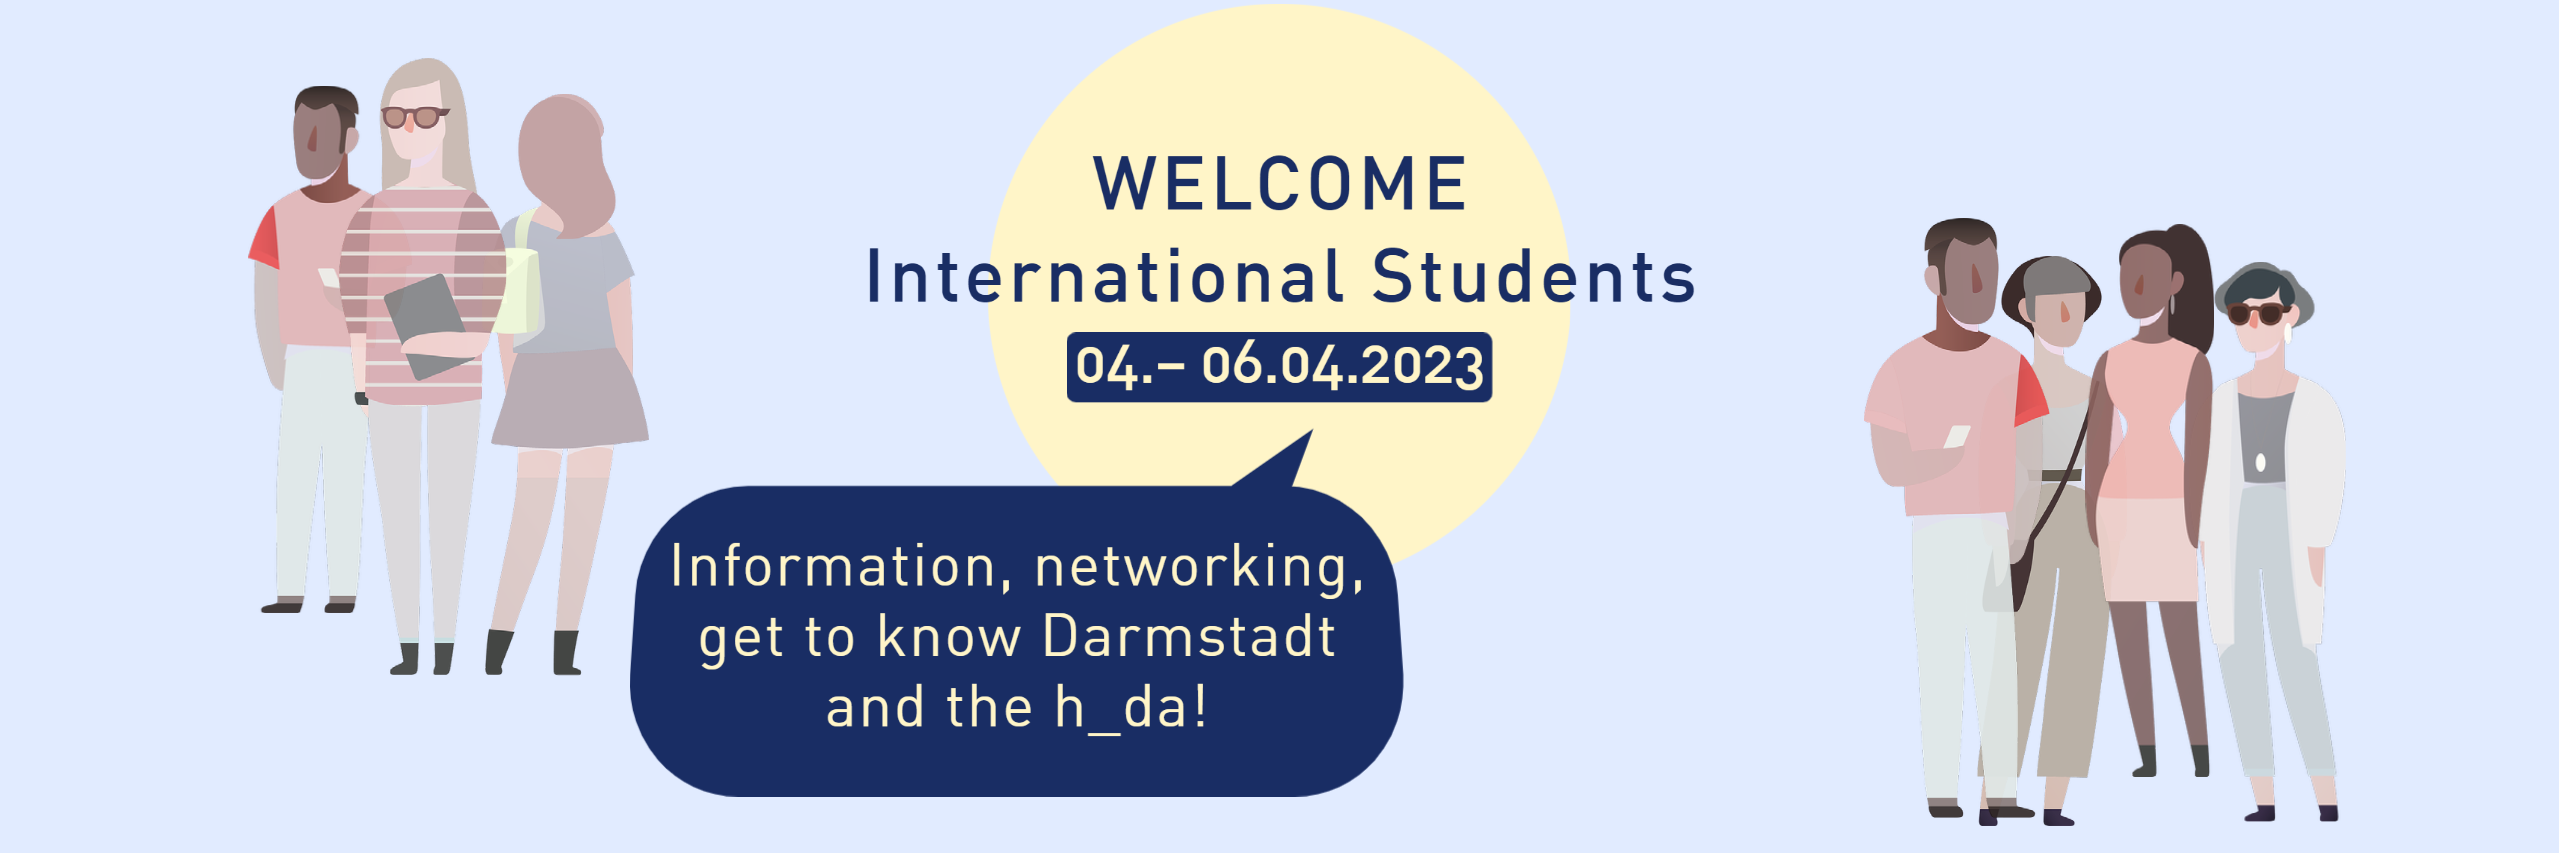 Welcome days for international students from April 4th to April 6th